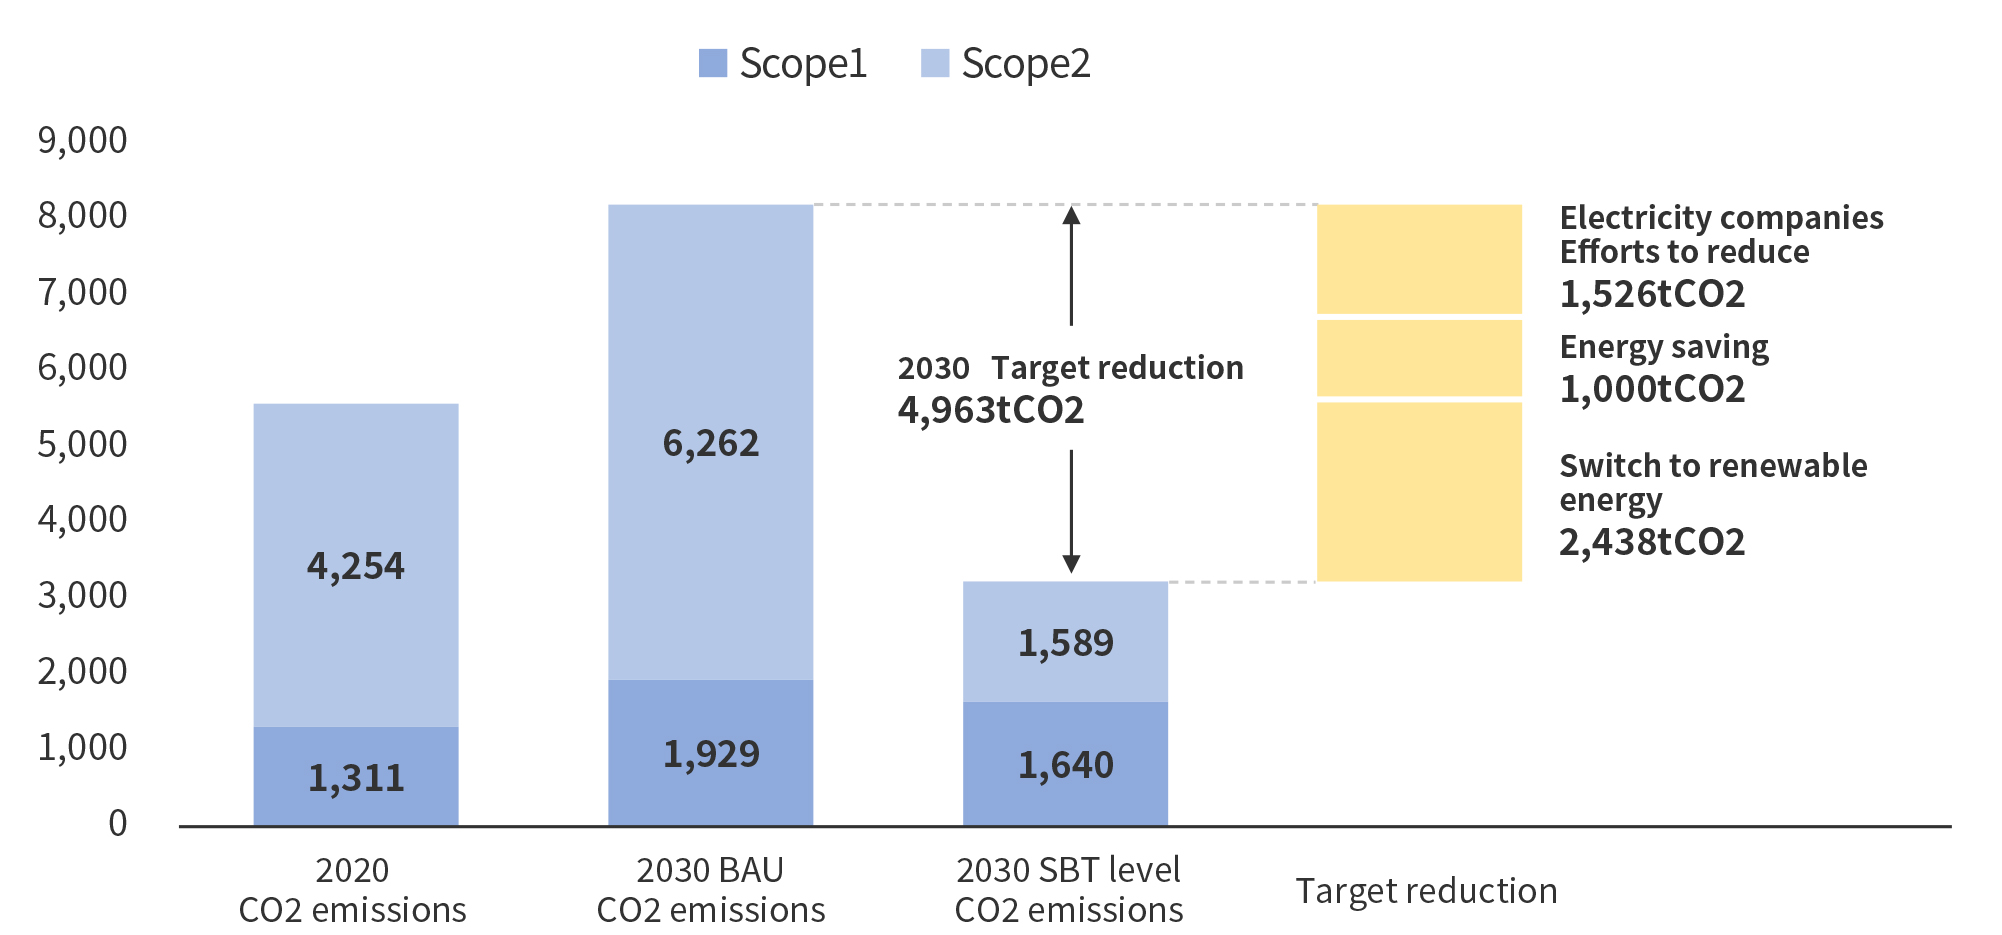 Scope 1 and 2 emissions reduction target